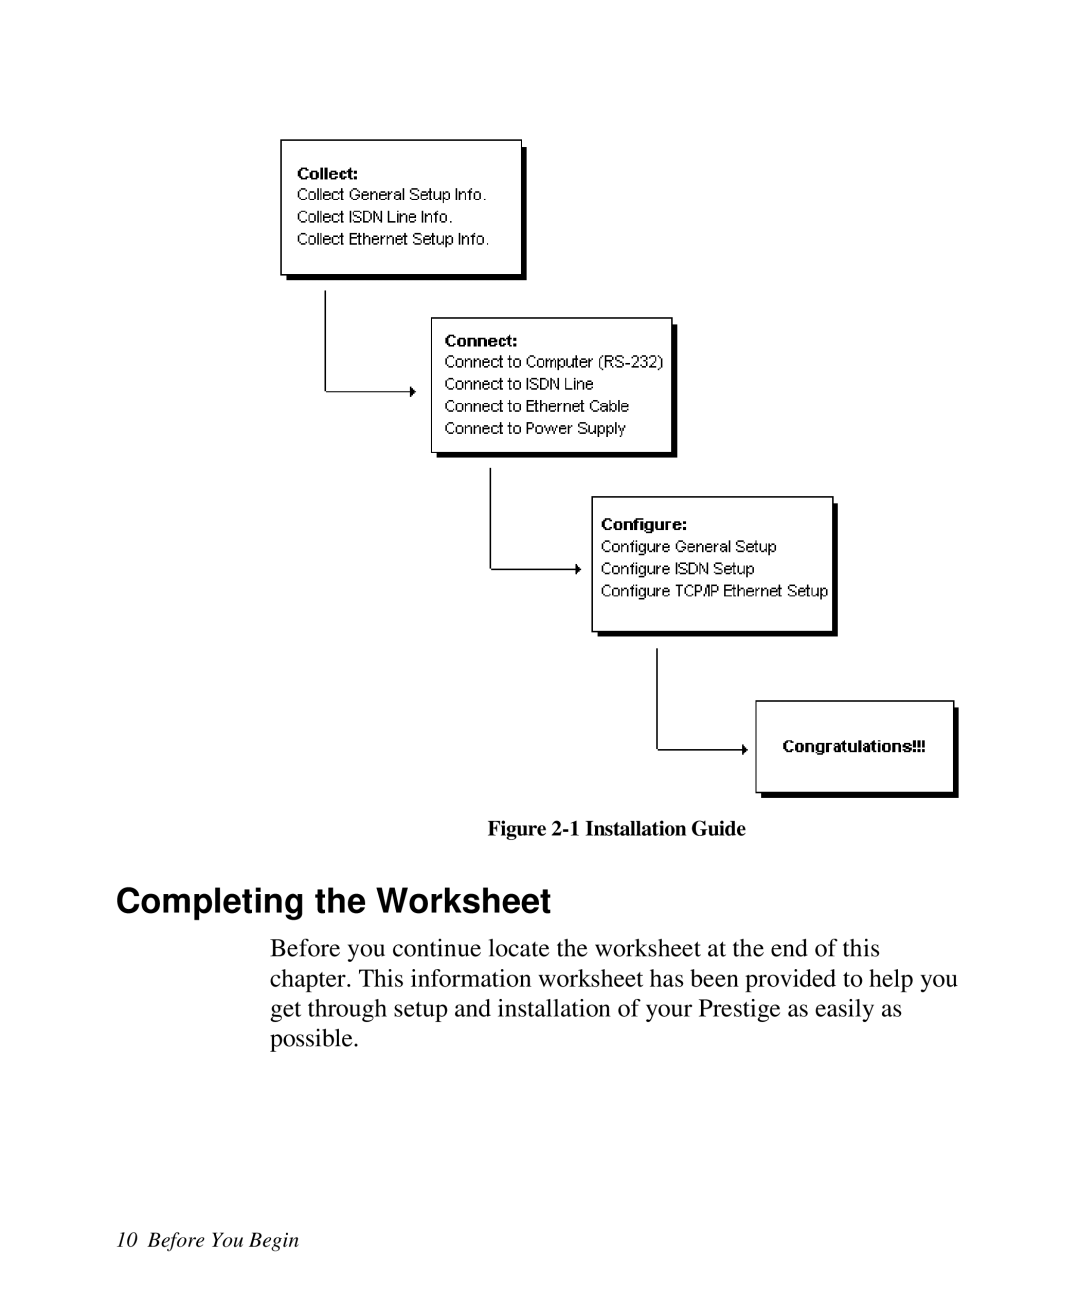 ZyXEL Communications 2864I user manual Completing the Worksheet, 1 Installation Guide, Before You Begin 